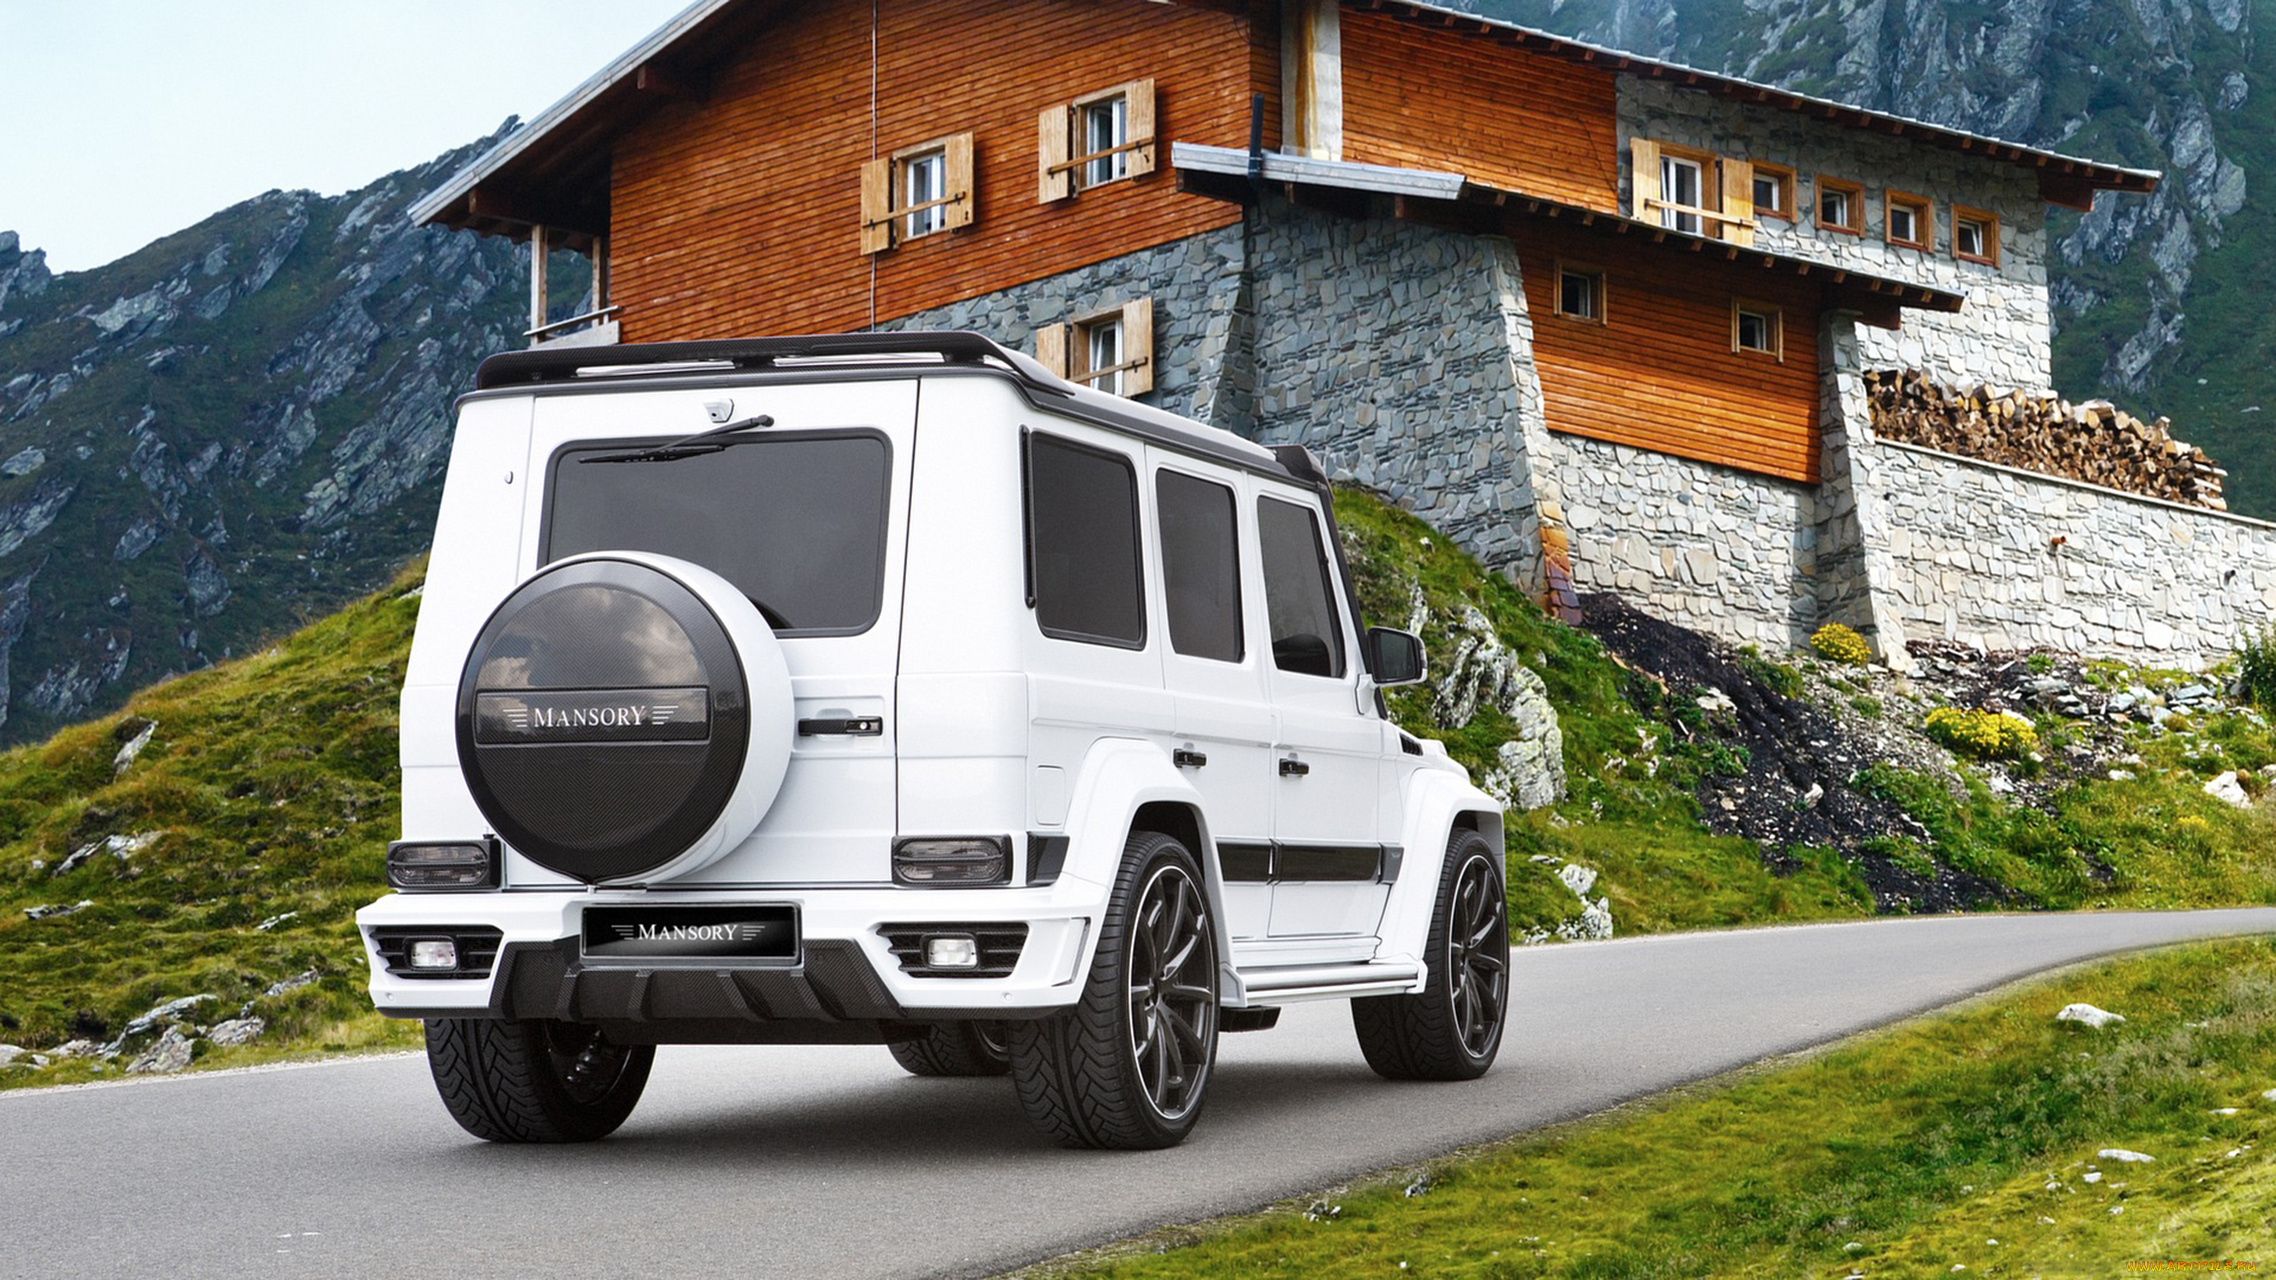 mansory, gronos, facelift, based, on, mercedes-benz, amg, g63, 2016, автомобили, mercedes-benz, based, 2016, g63, facelift, amg, gronos, mansory